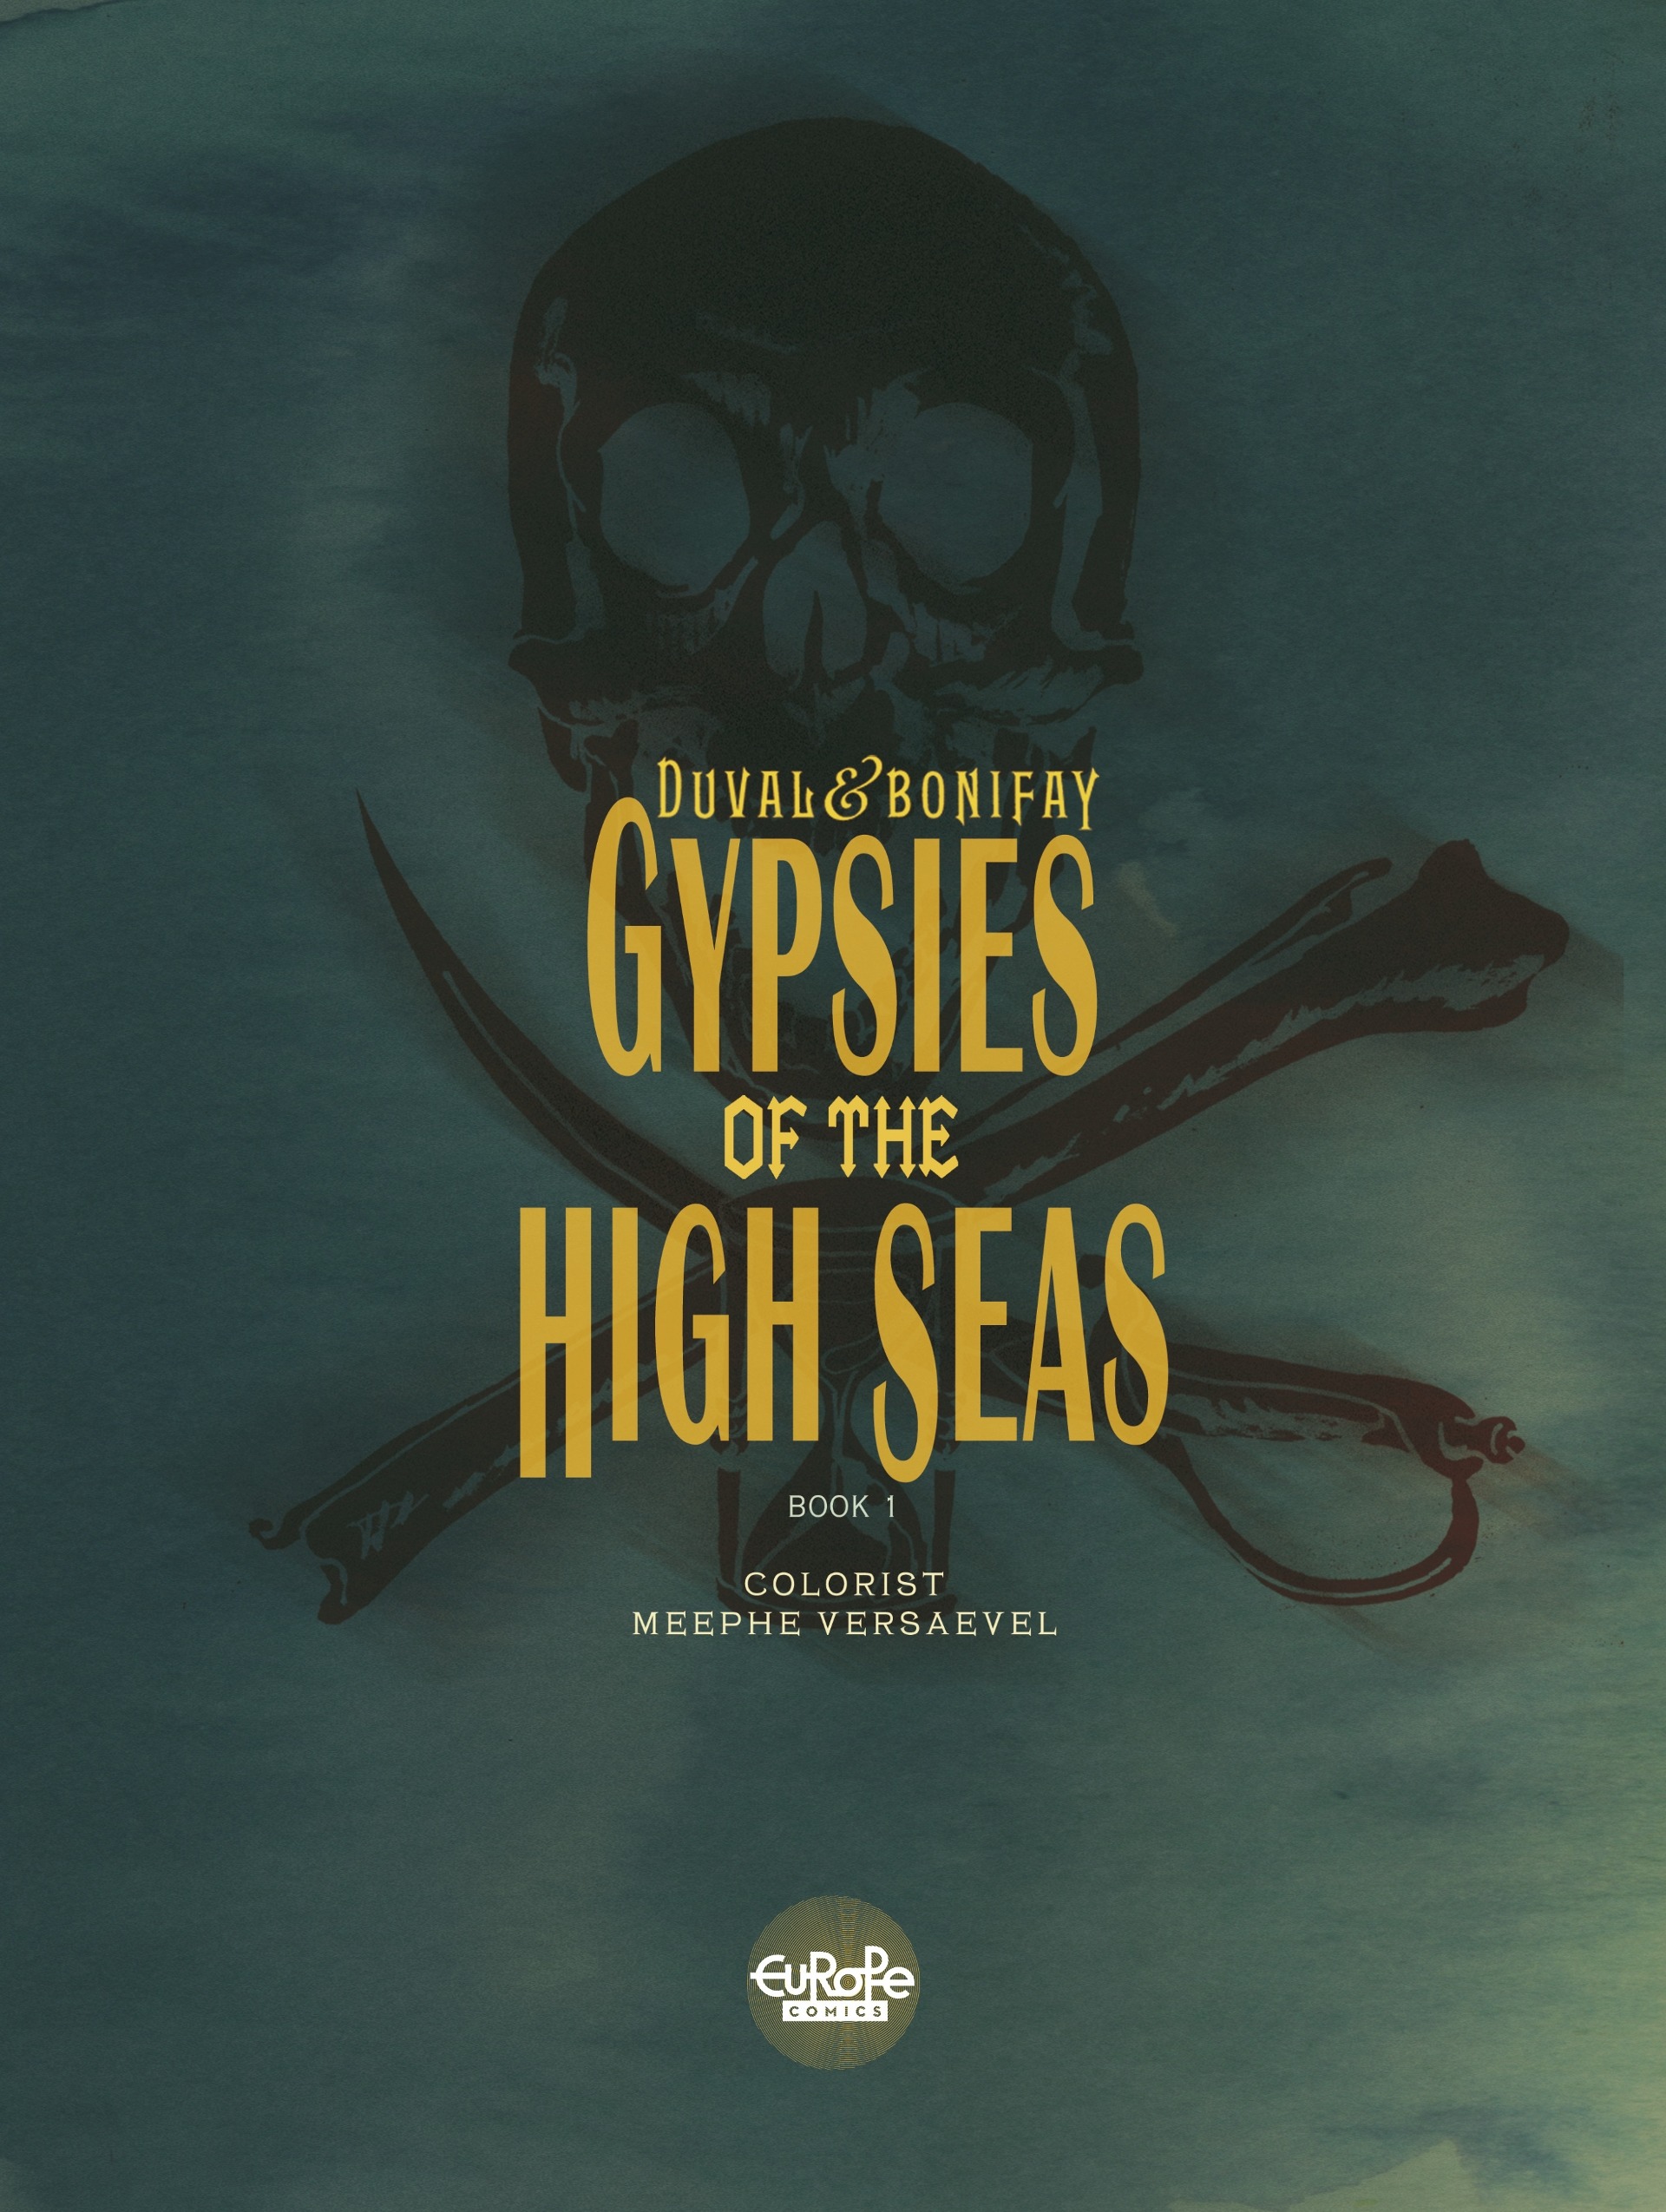 Read online Gypsies of the High Seas comic -  Issue # TPB 1 - 2